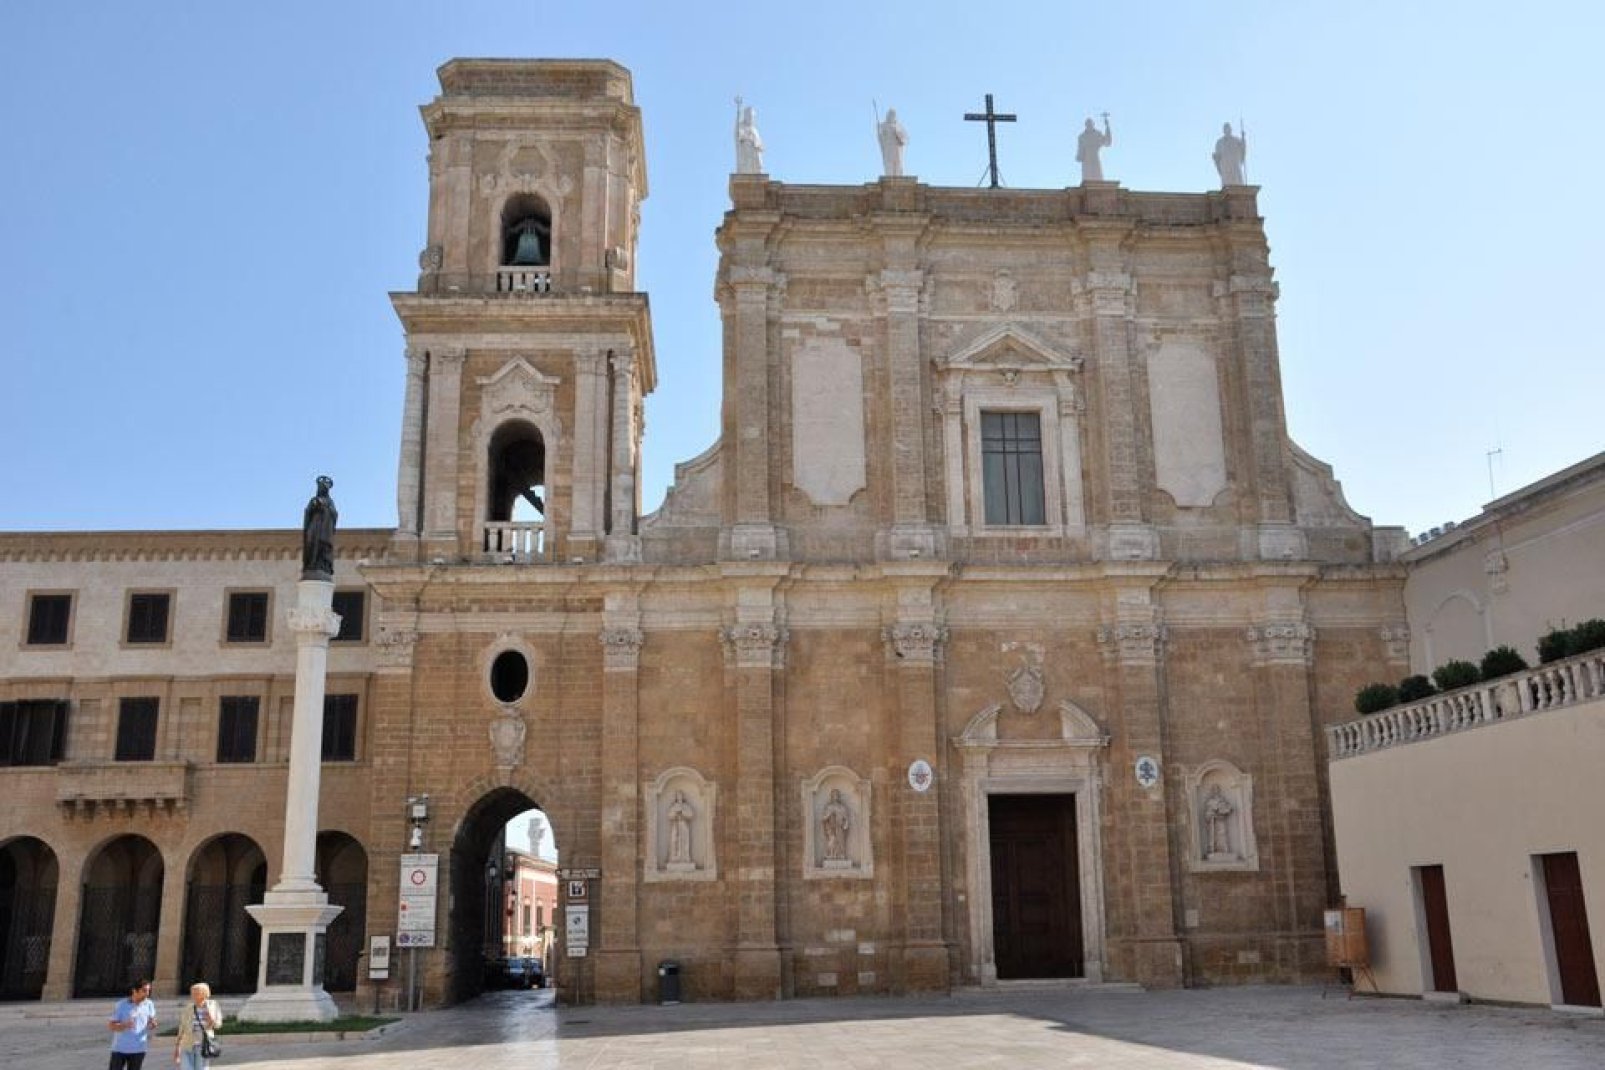 The Brindisi Cathedral was built between the 11th and the 12th centuries.